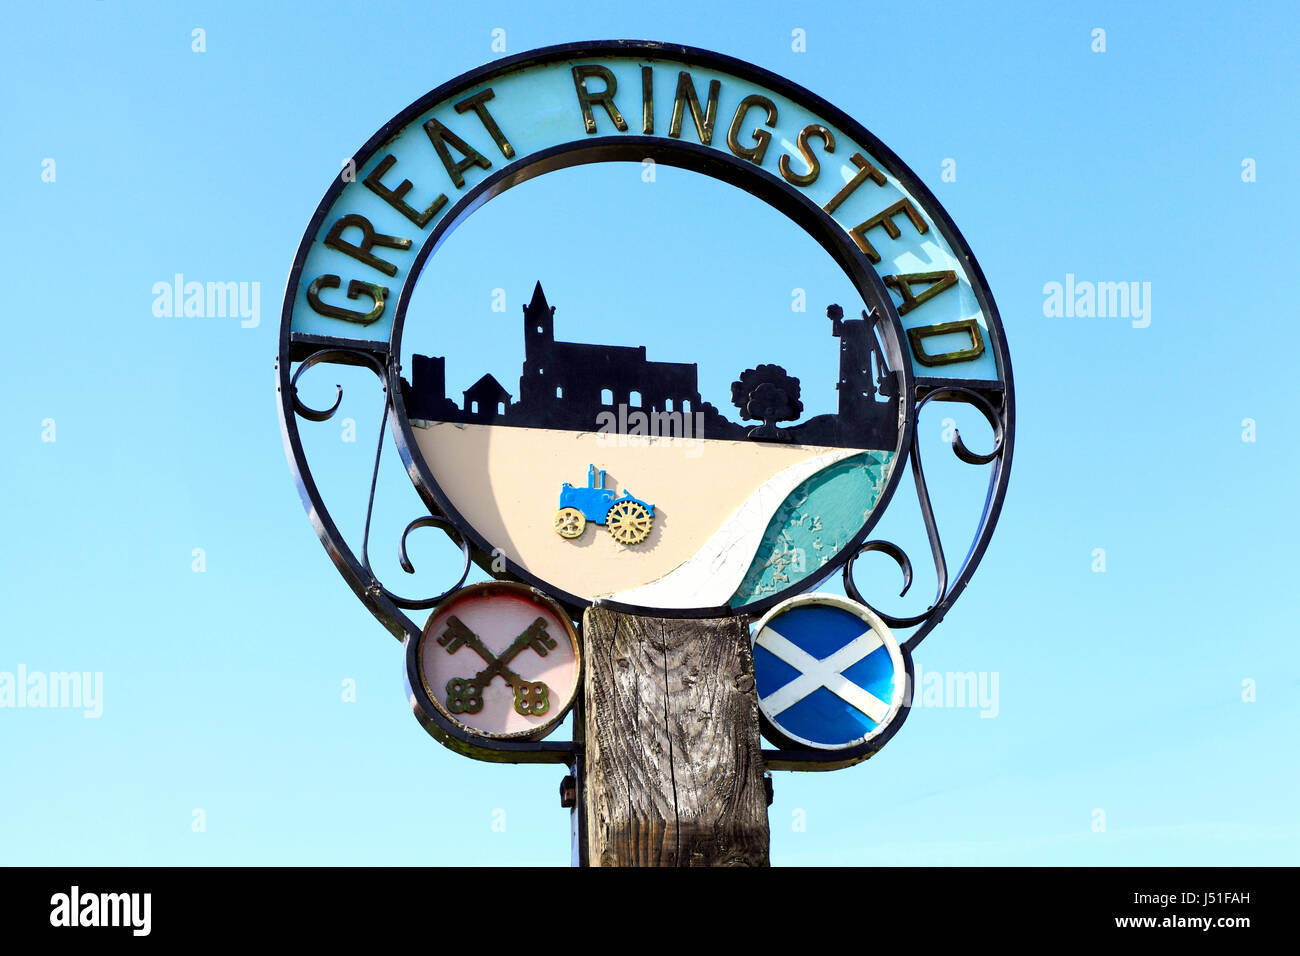 Great Ringstead, Norfolk, village sign, showing cross keys of St. Peter,  saltire cross of St. Andrew, England, UK Stock Photo